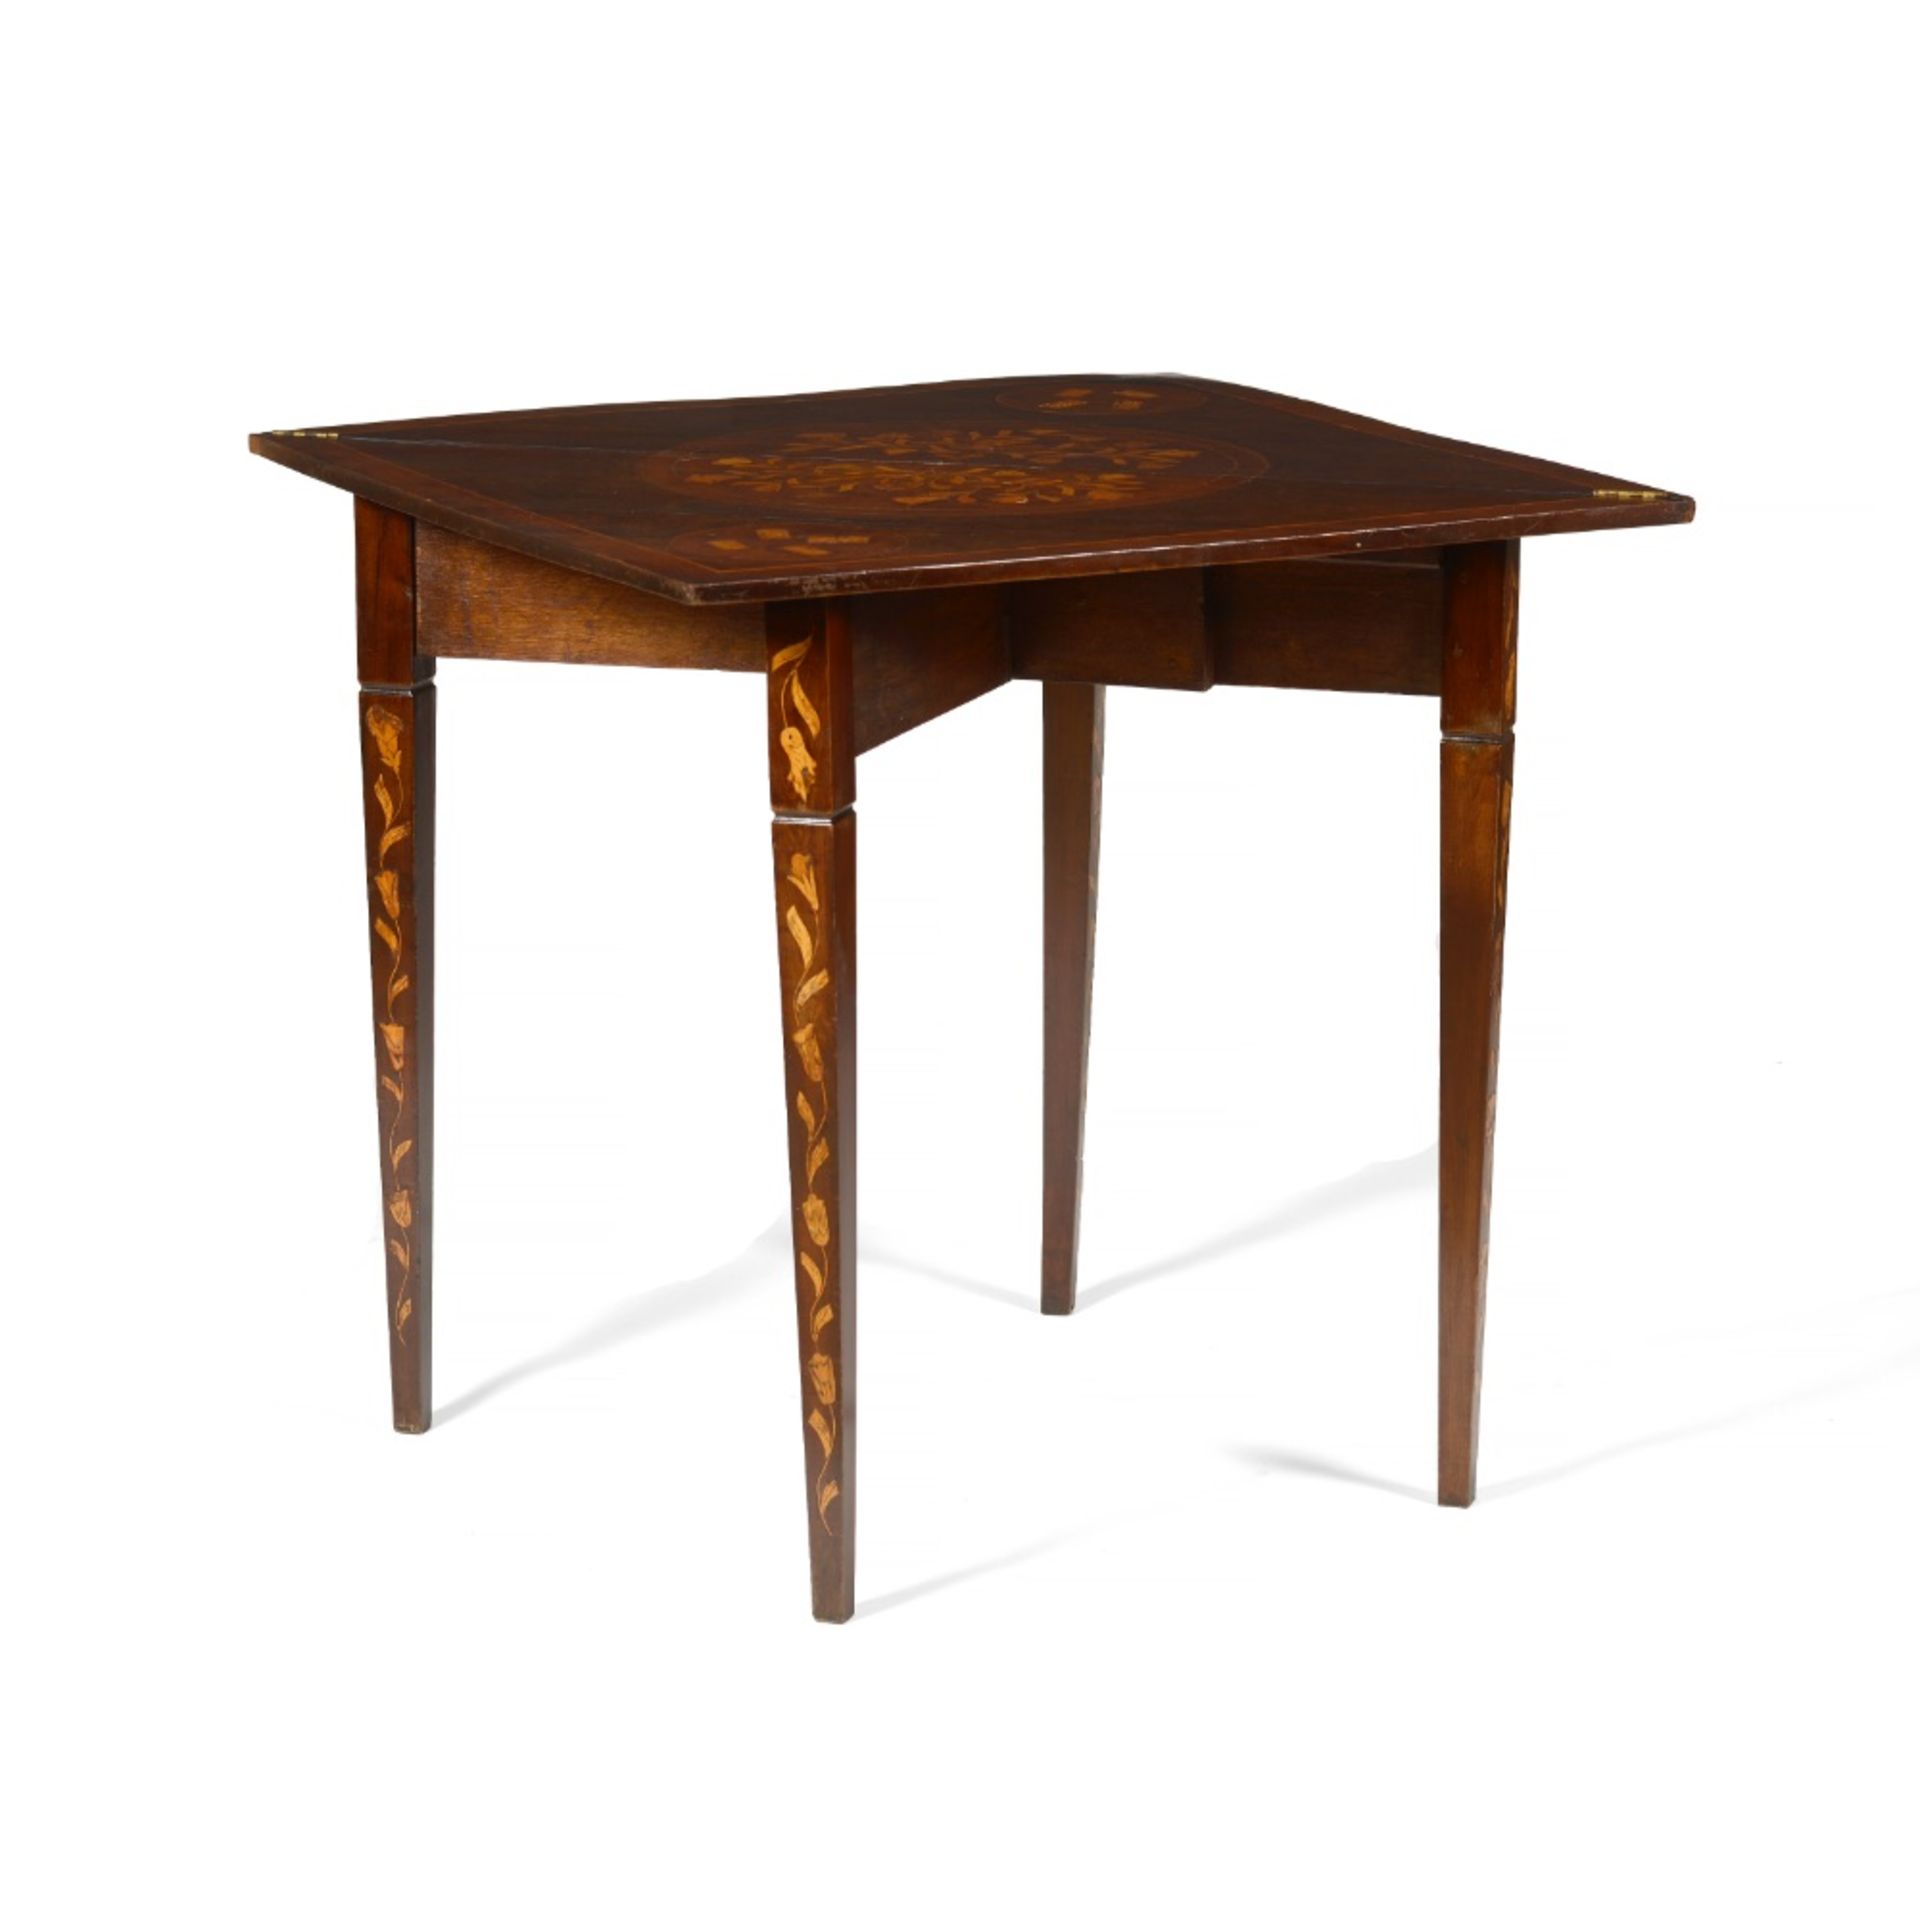 A triangular Neoclassical games table - Image 3 of 3